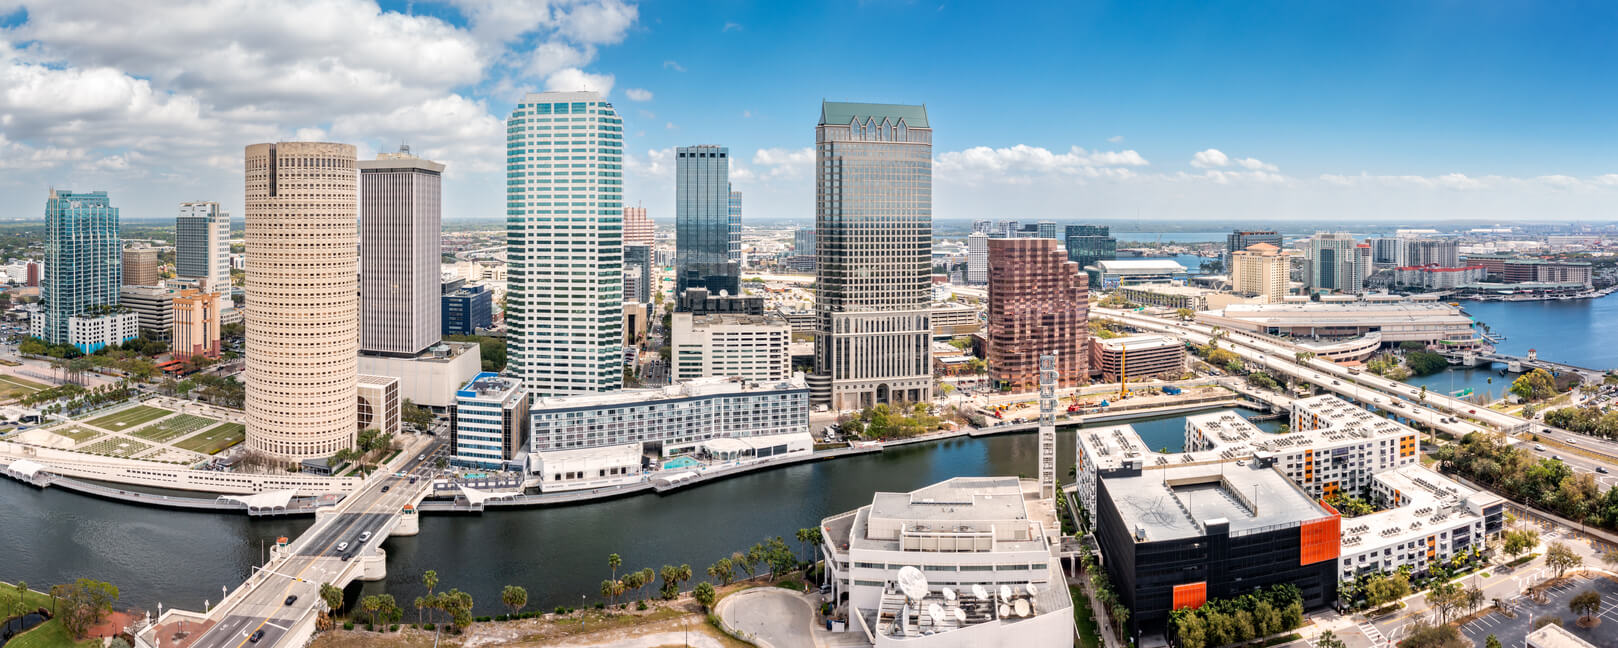 Aerial panorama of Tampa, Florida skyline. Our commercial real estate agency is located in Downtown Tampa.